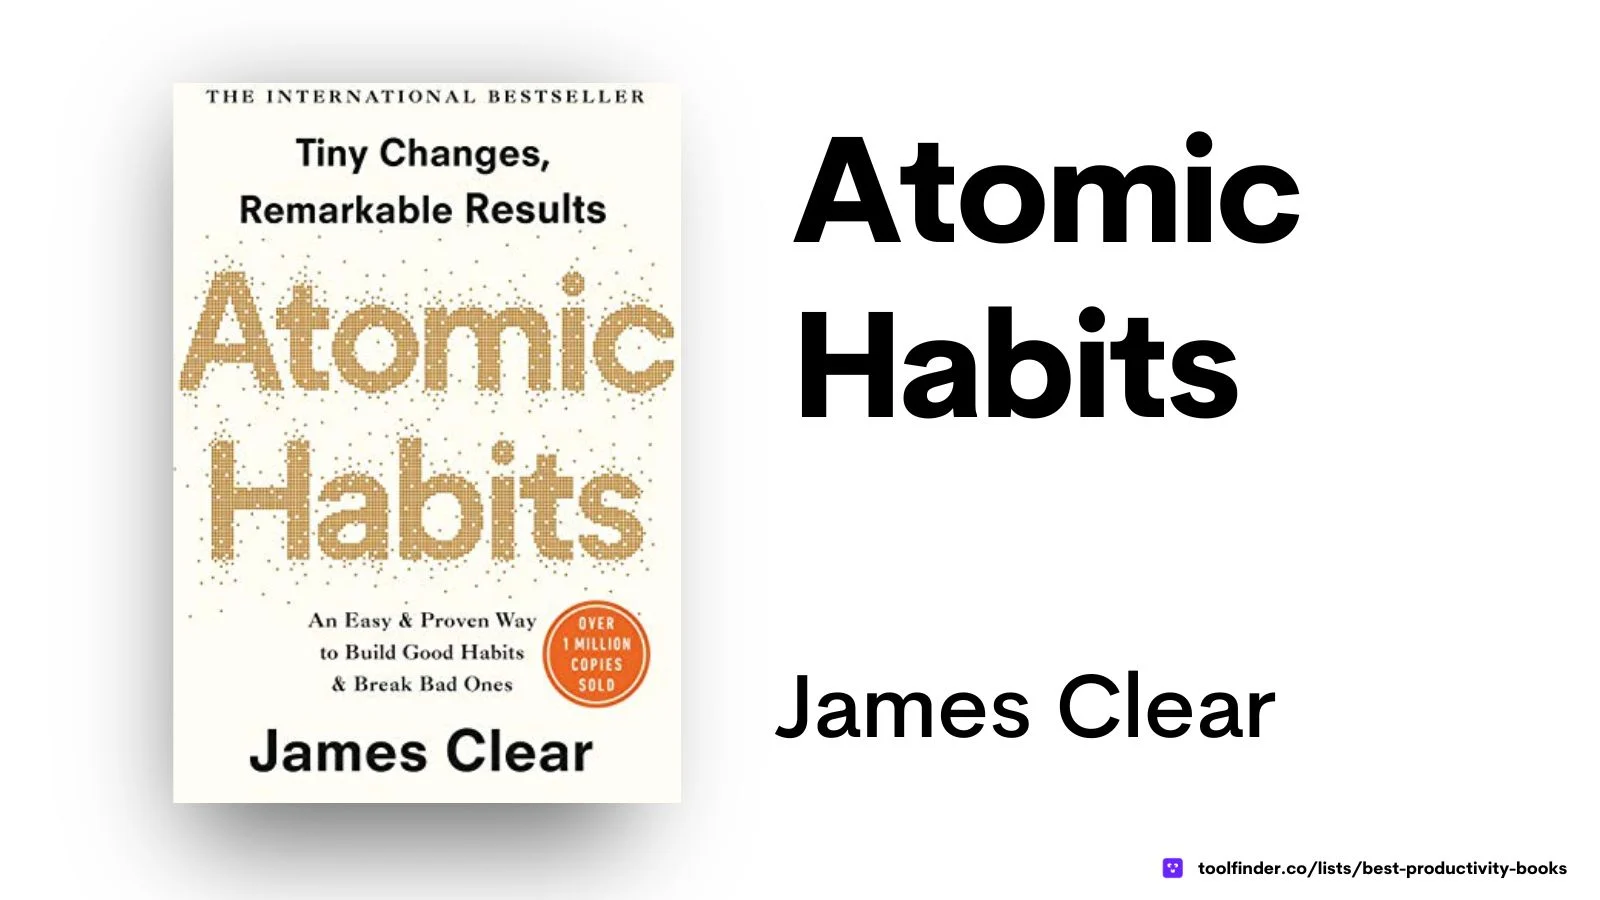 Atomic Habits by James Clear for creating new healthy habits.